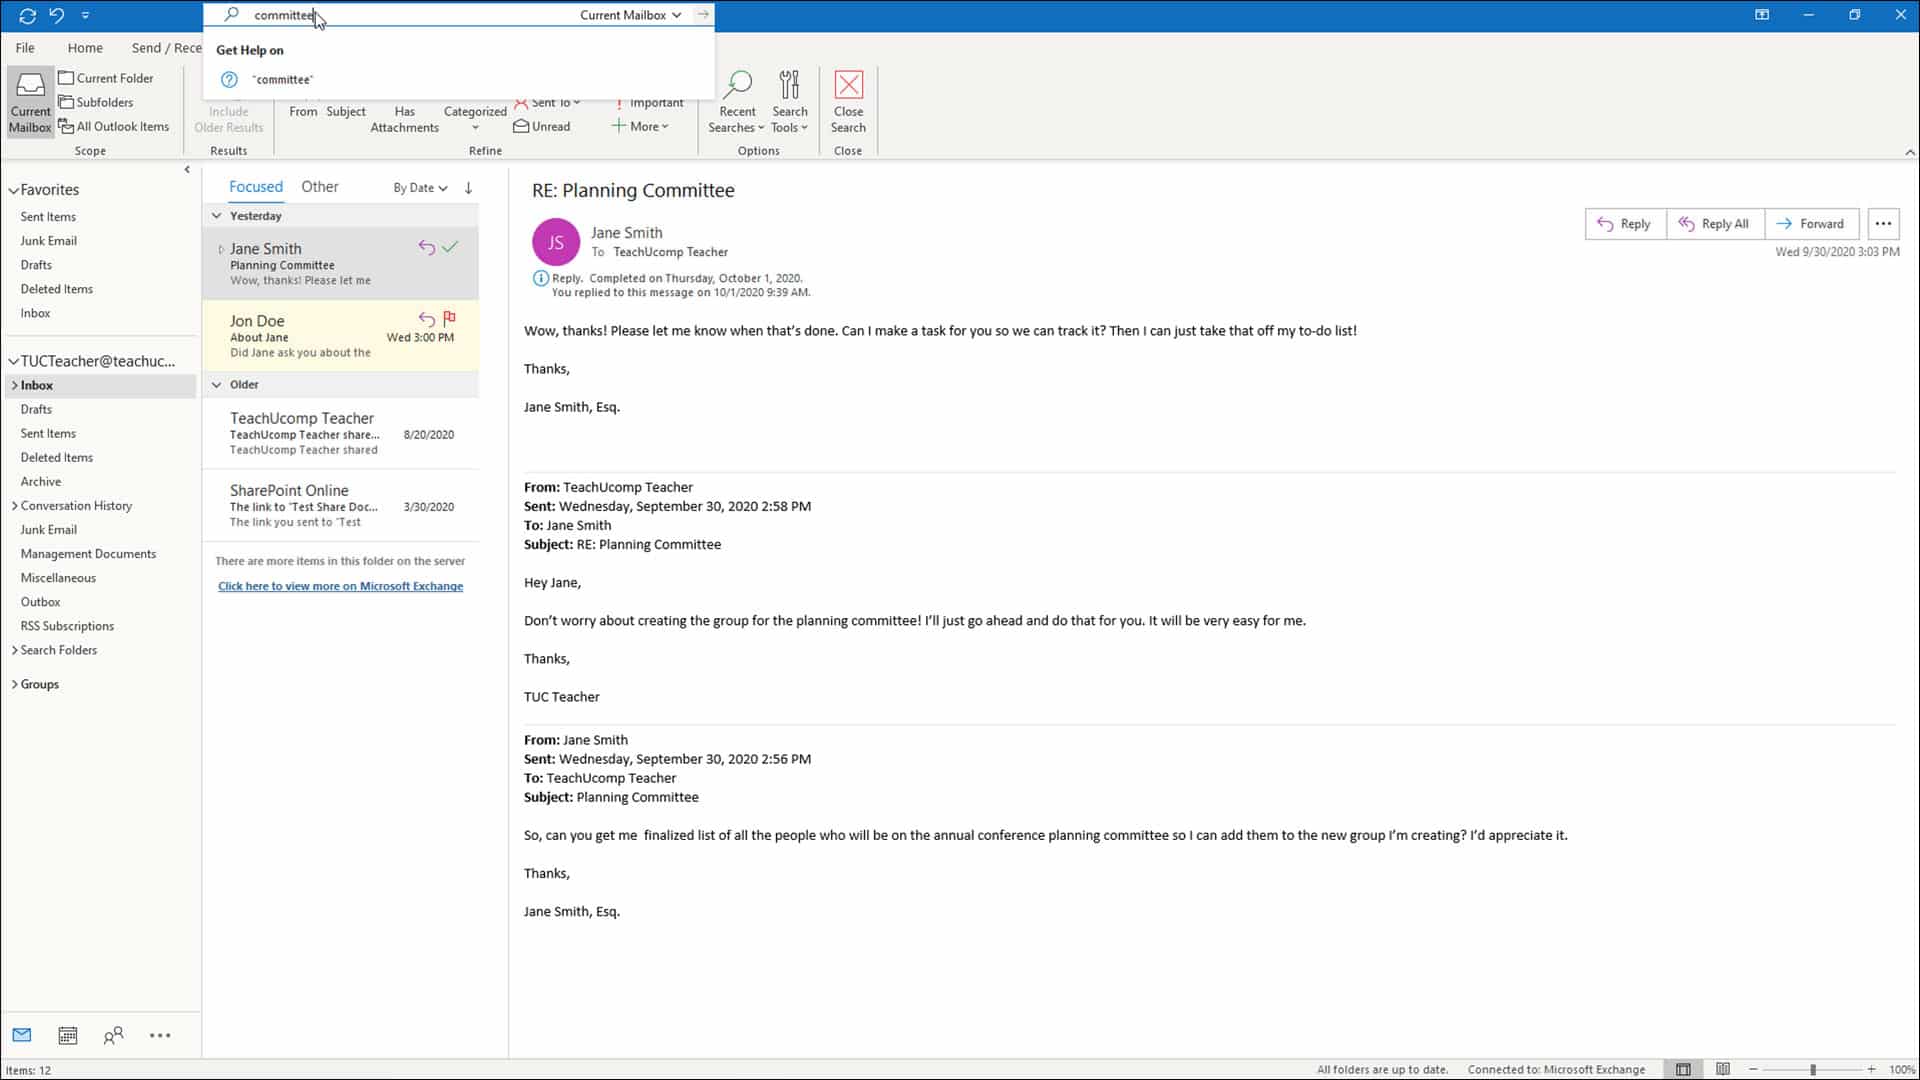 Find Email in Outlook - Instructions and Video Lesson